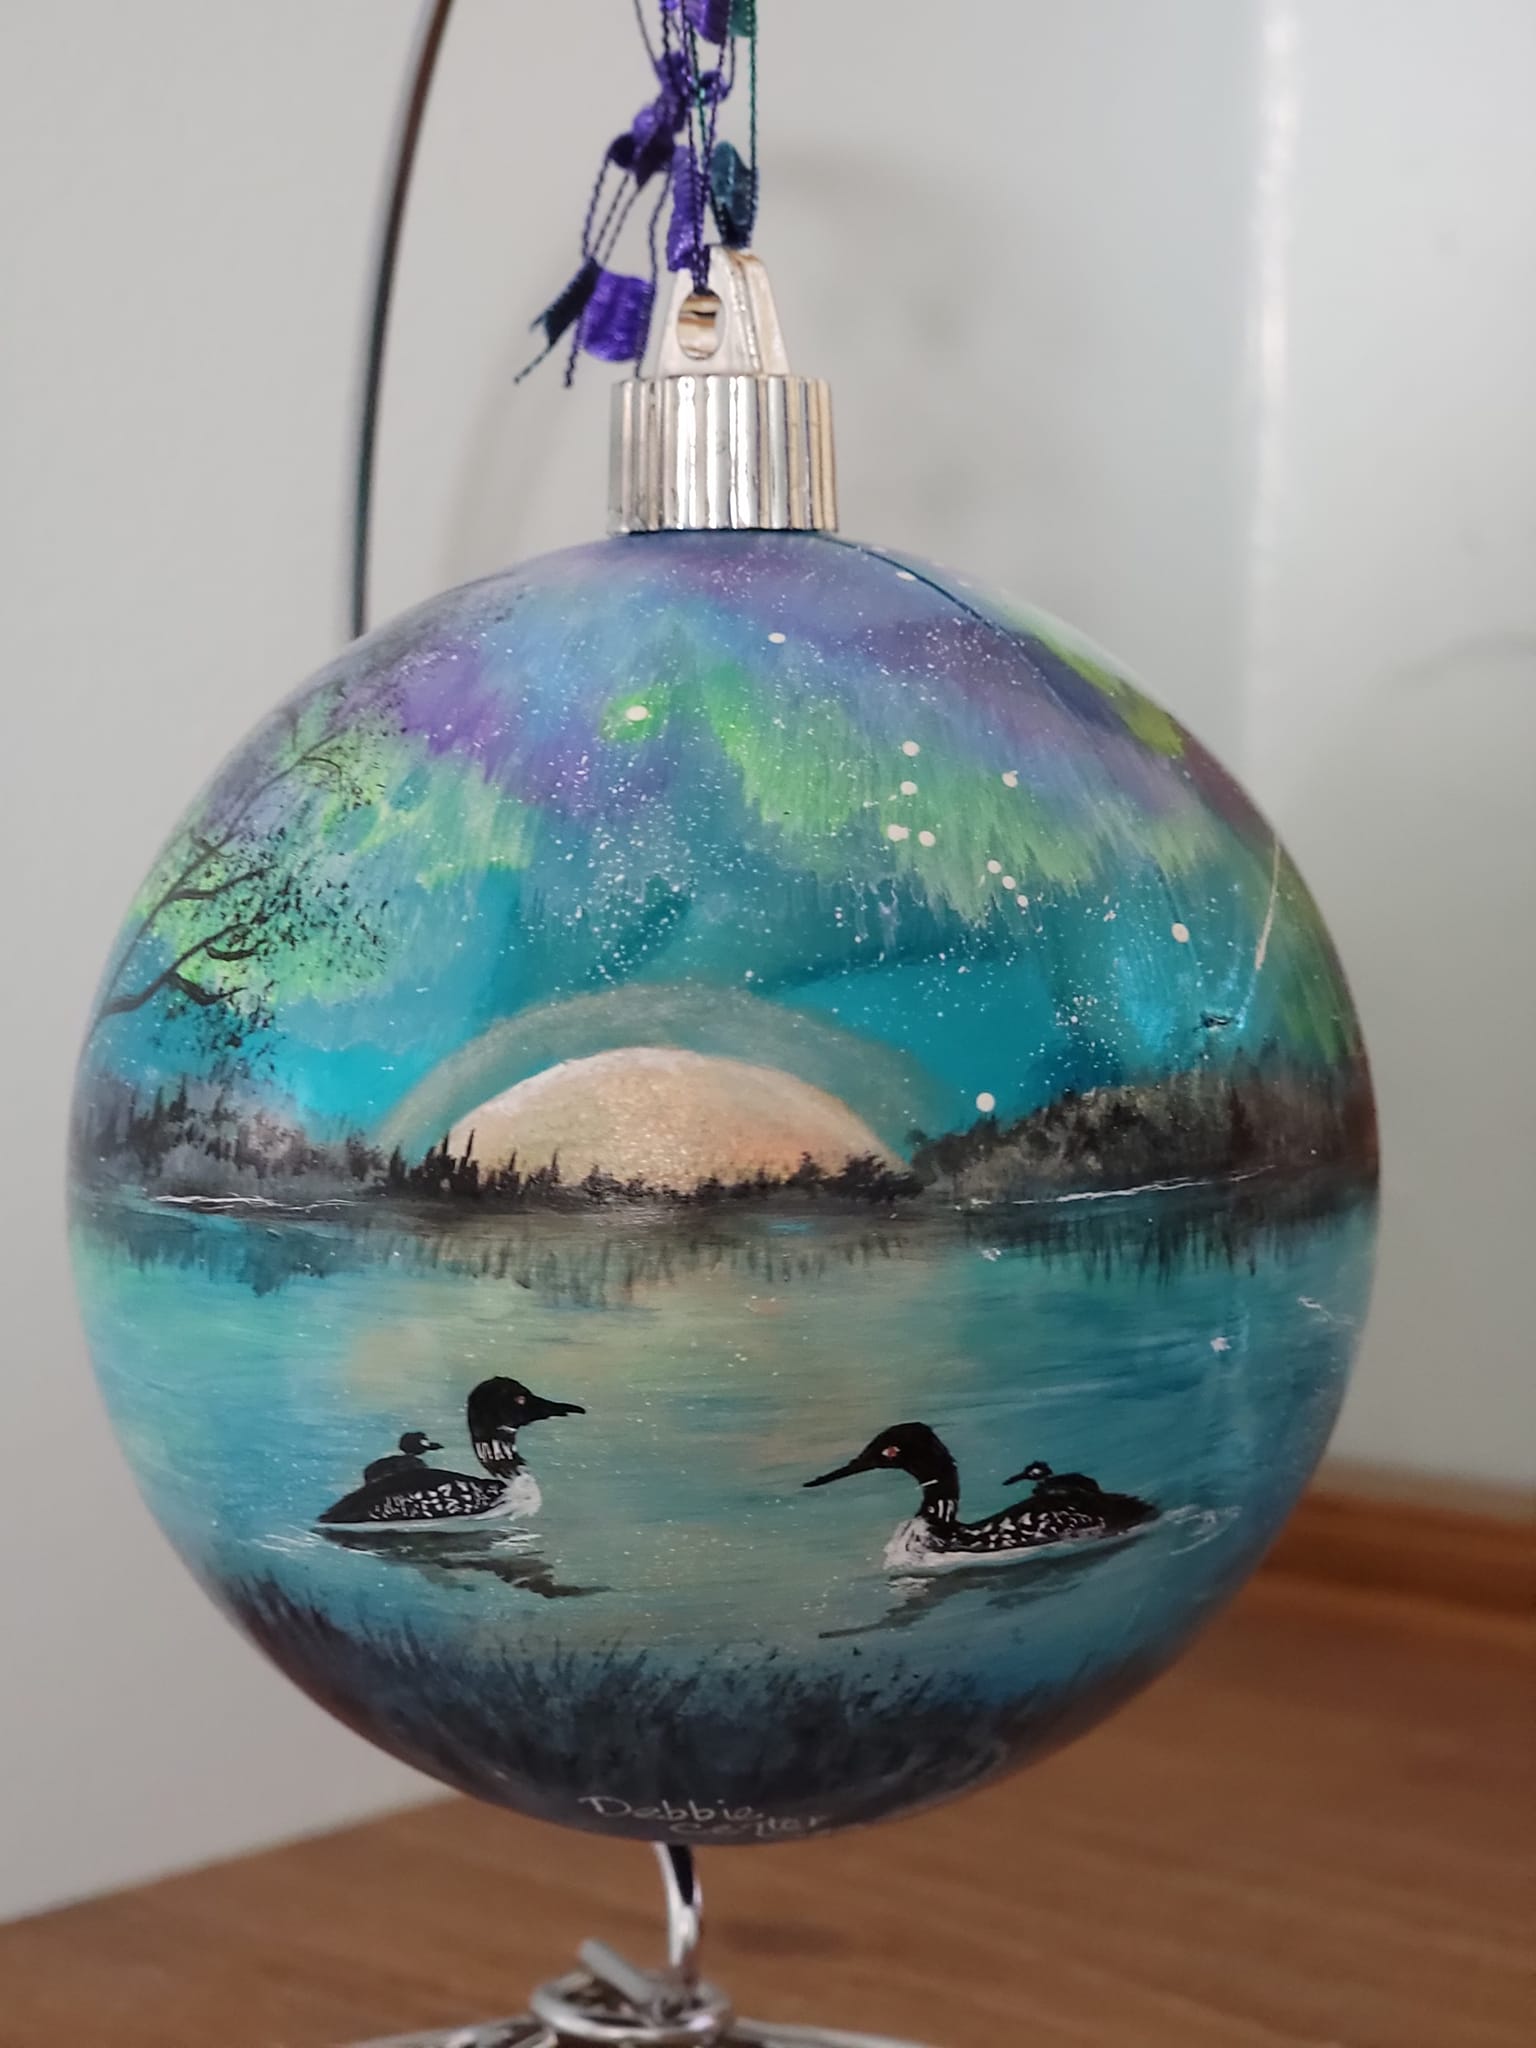 4" Nature Ornaments, Custom Painted to Your Preferences  $65 (6-8 week lead time)